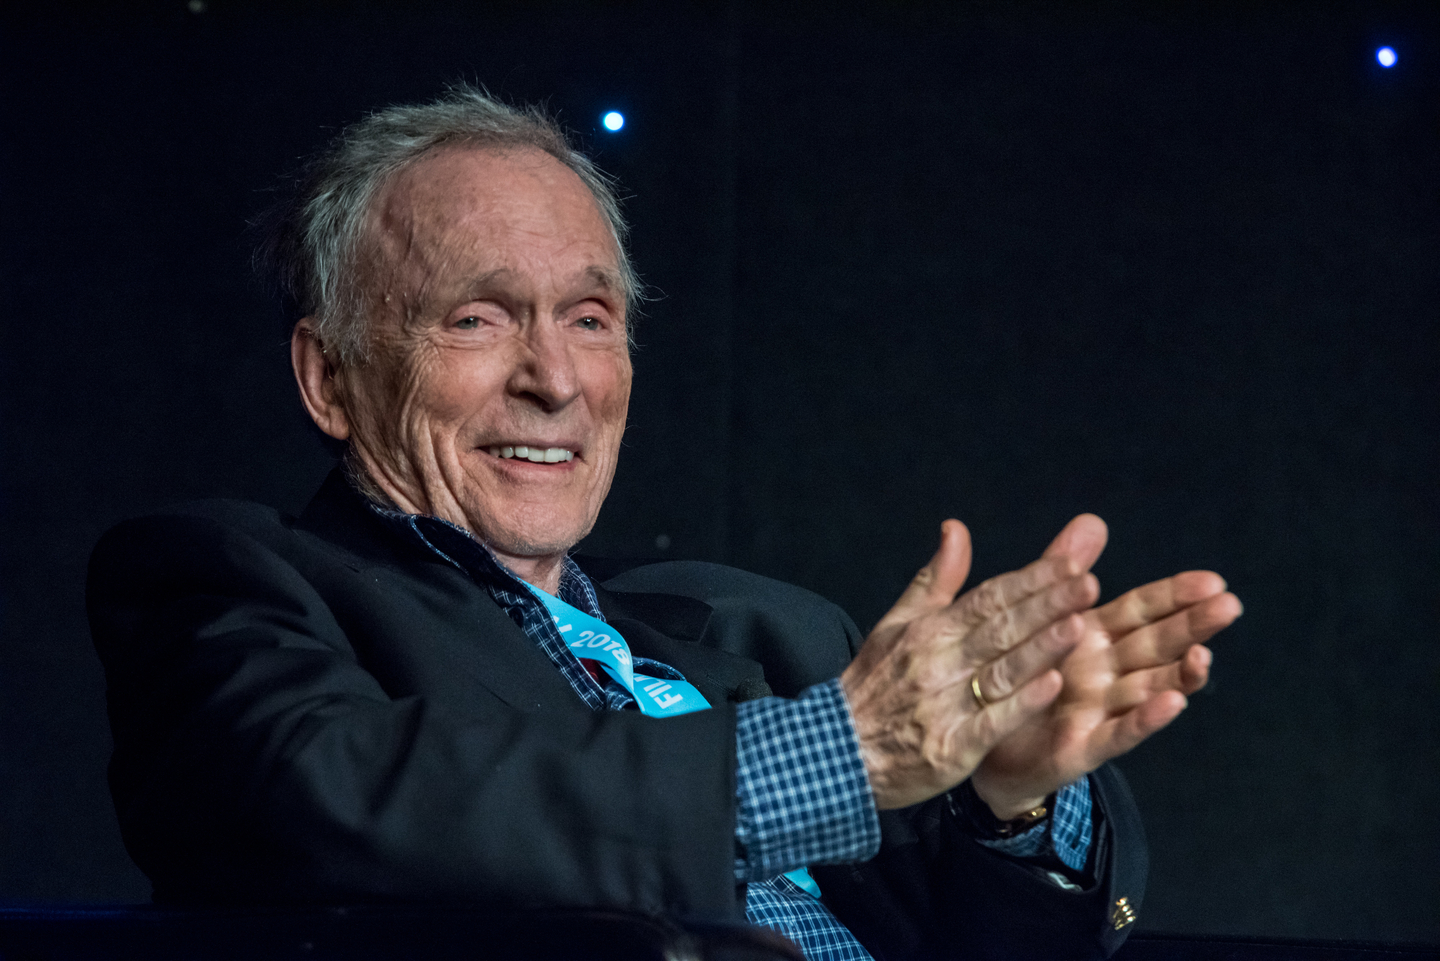 Dick Cavett at Cavett on Comedy with Dave Hill. Photo by Amanda Stronza